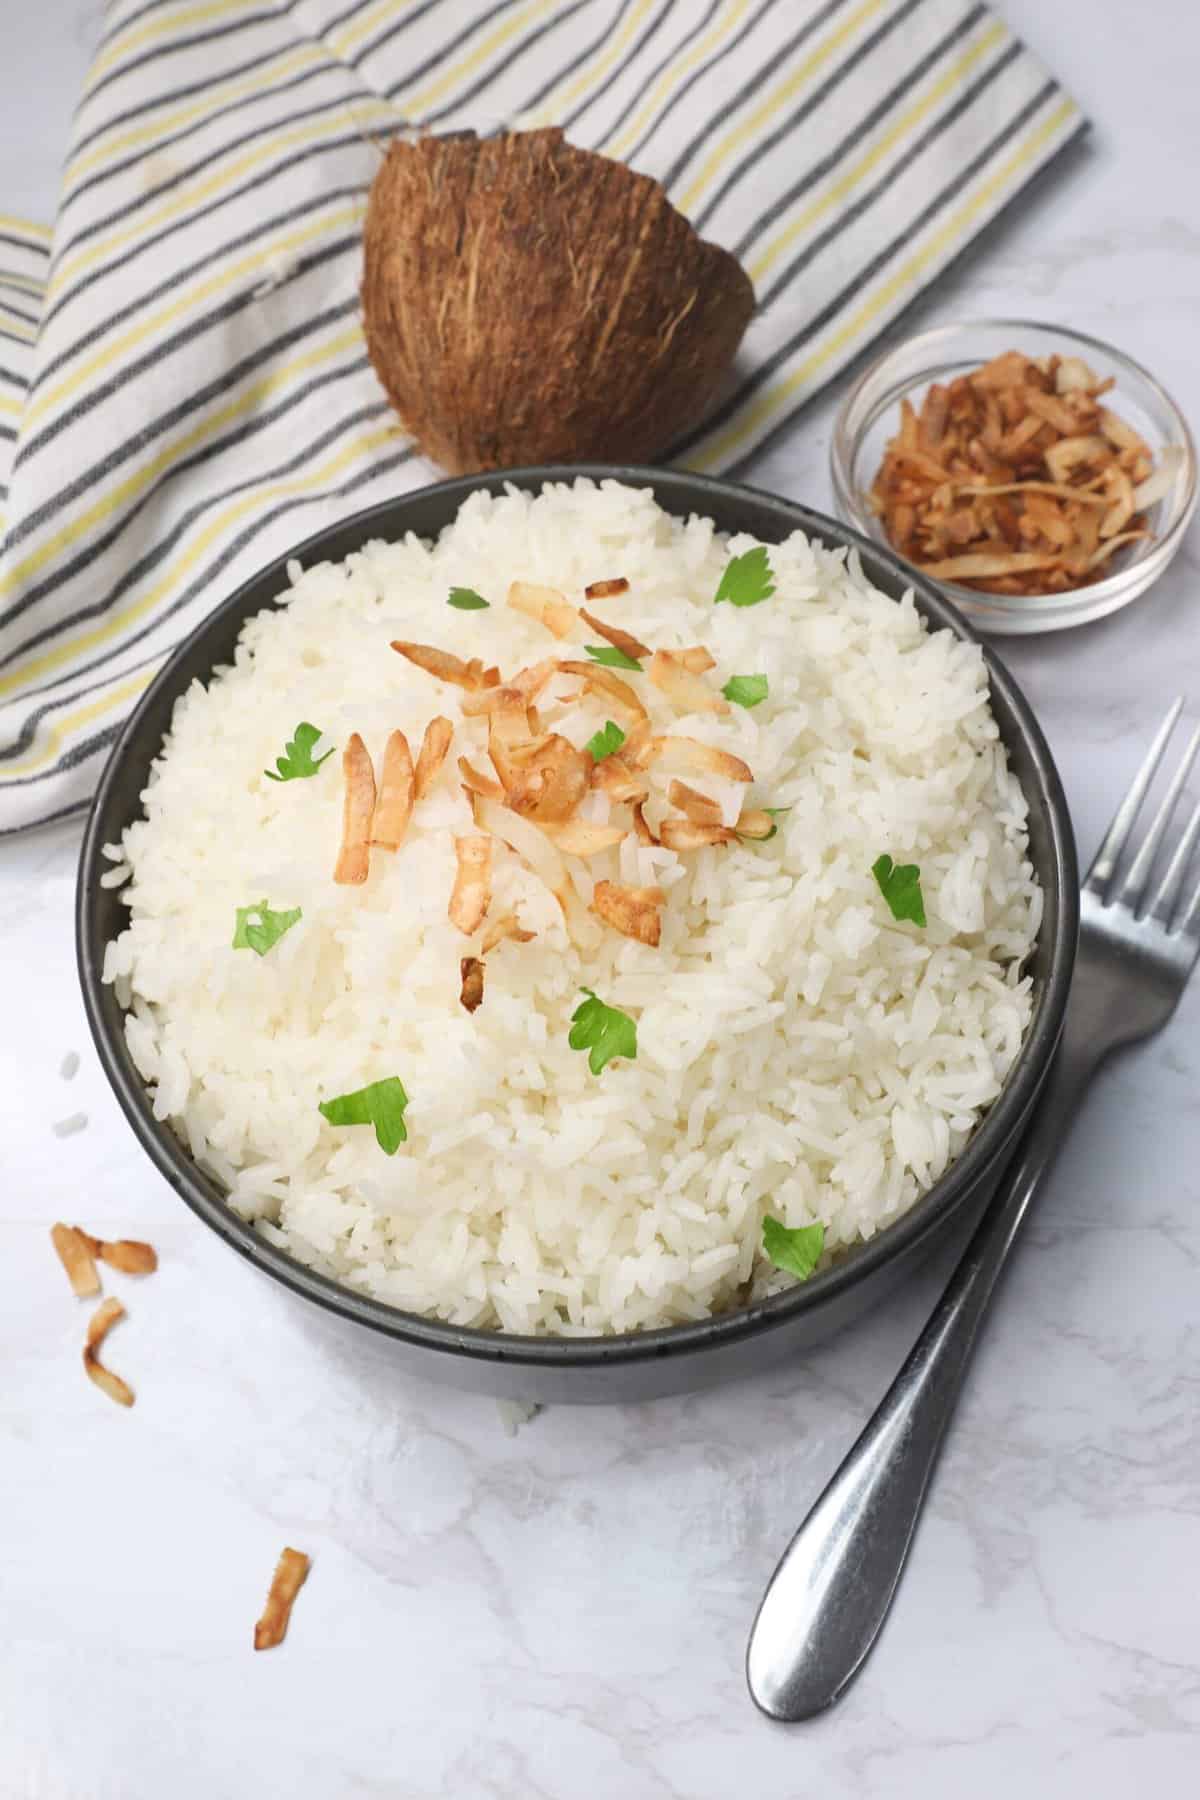 An insanely delicious bowl of Coconut Jasmine Rice